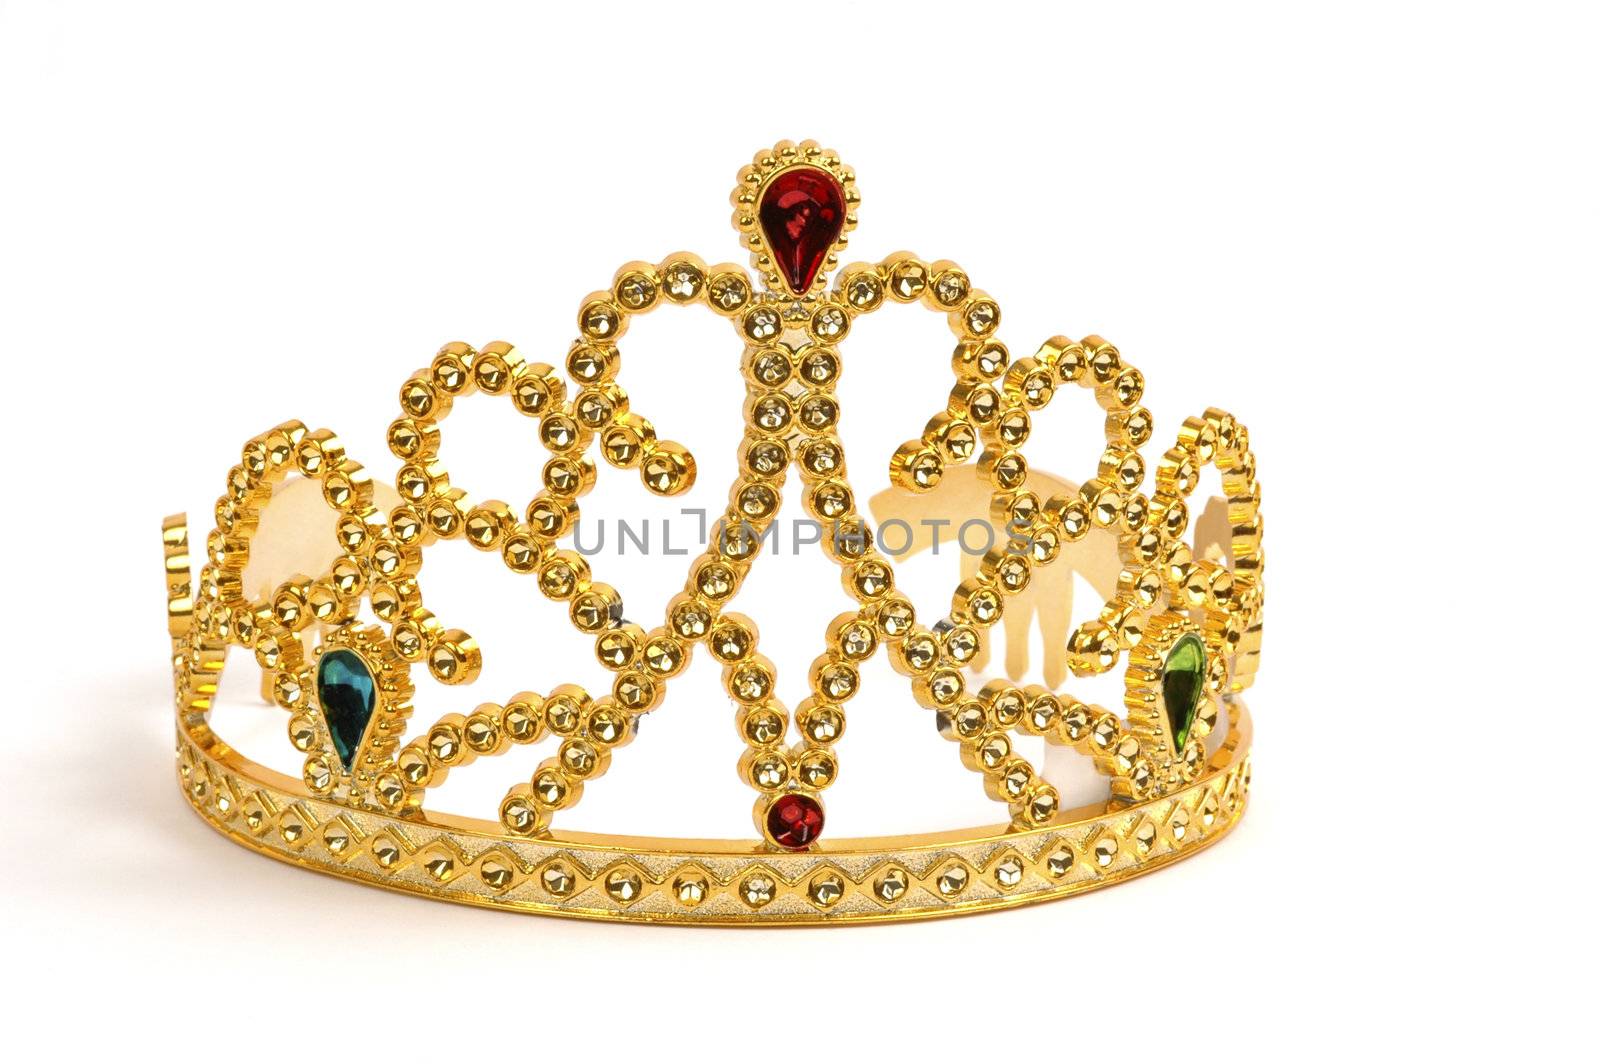 Gold tiara studded with fake jewels and diamonds.